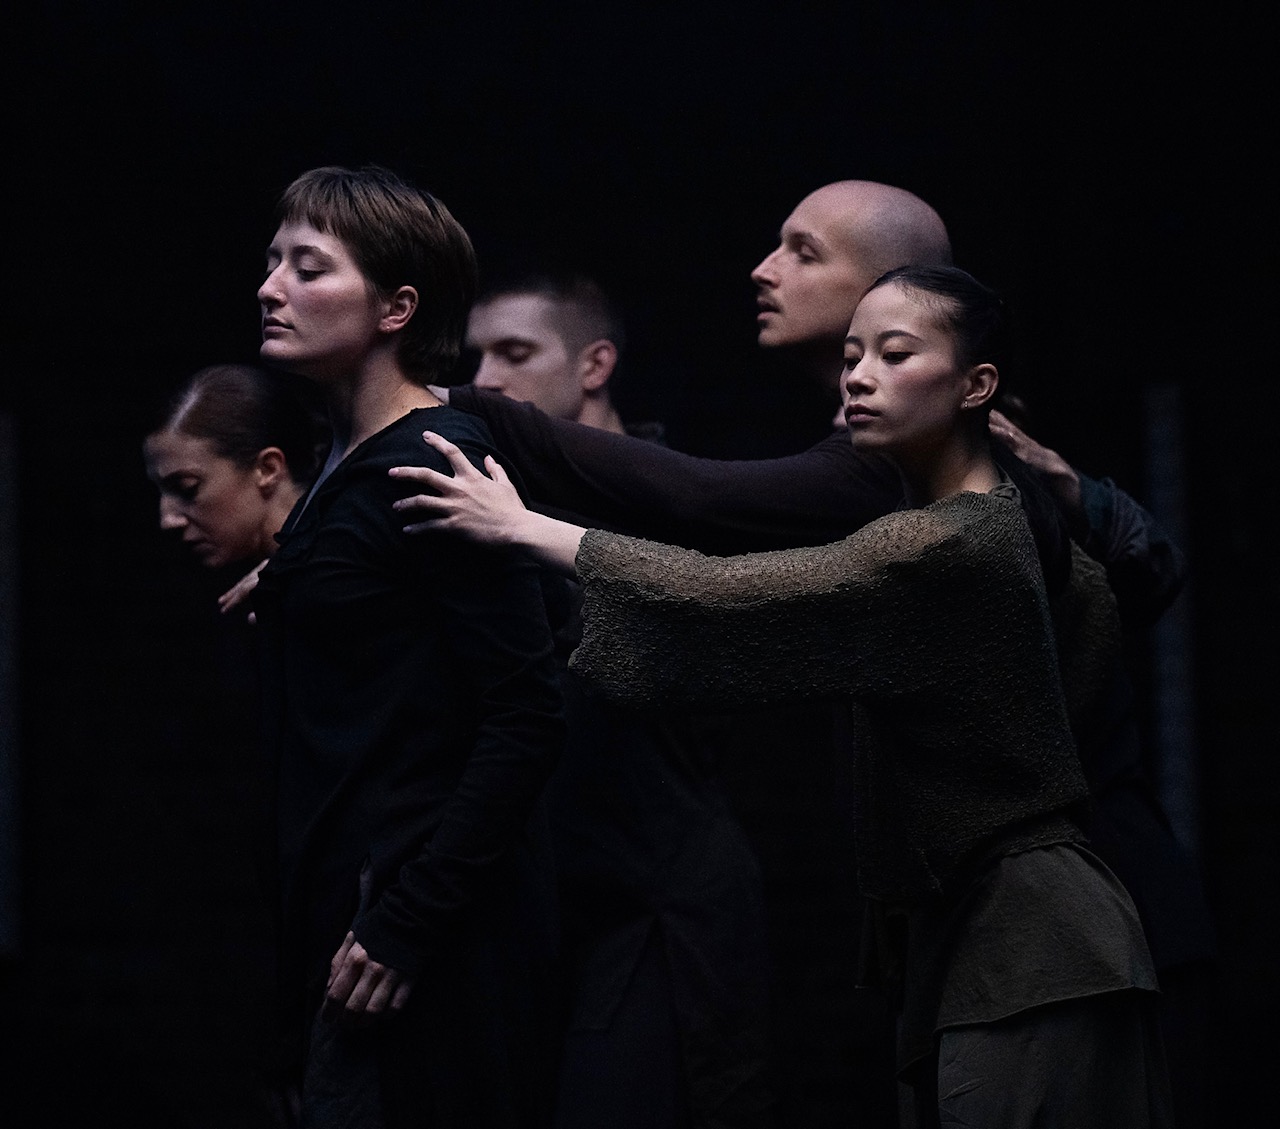 Five dancers' pictured in a head and torso shot tableau. Wearing dark colors so they melt into the black background we notice they face the right side, mostly with eyes closed, faces all poised in various states of reflection. 